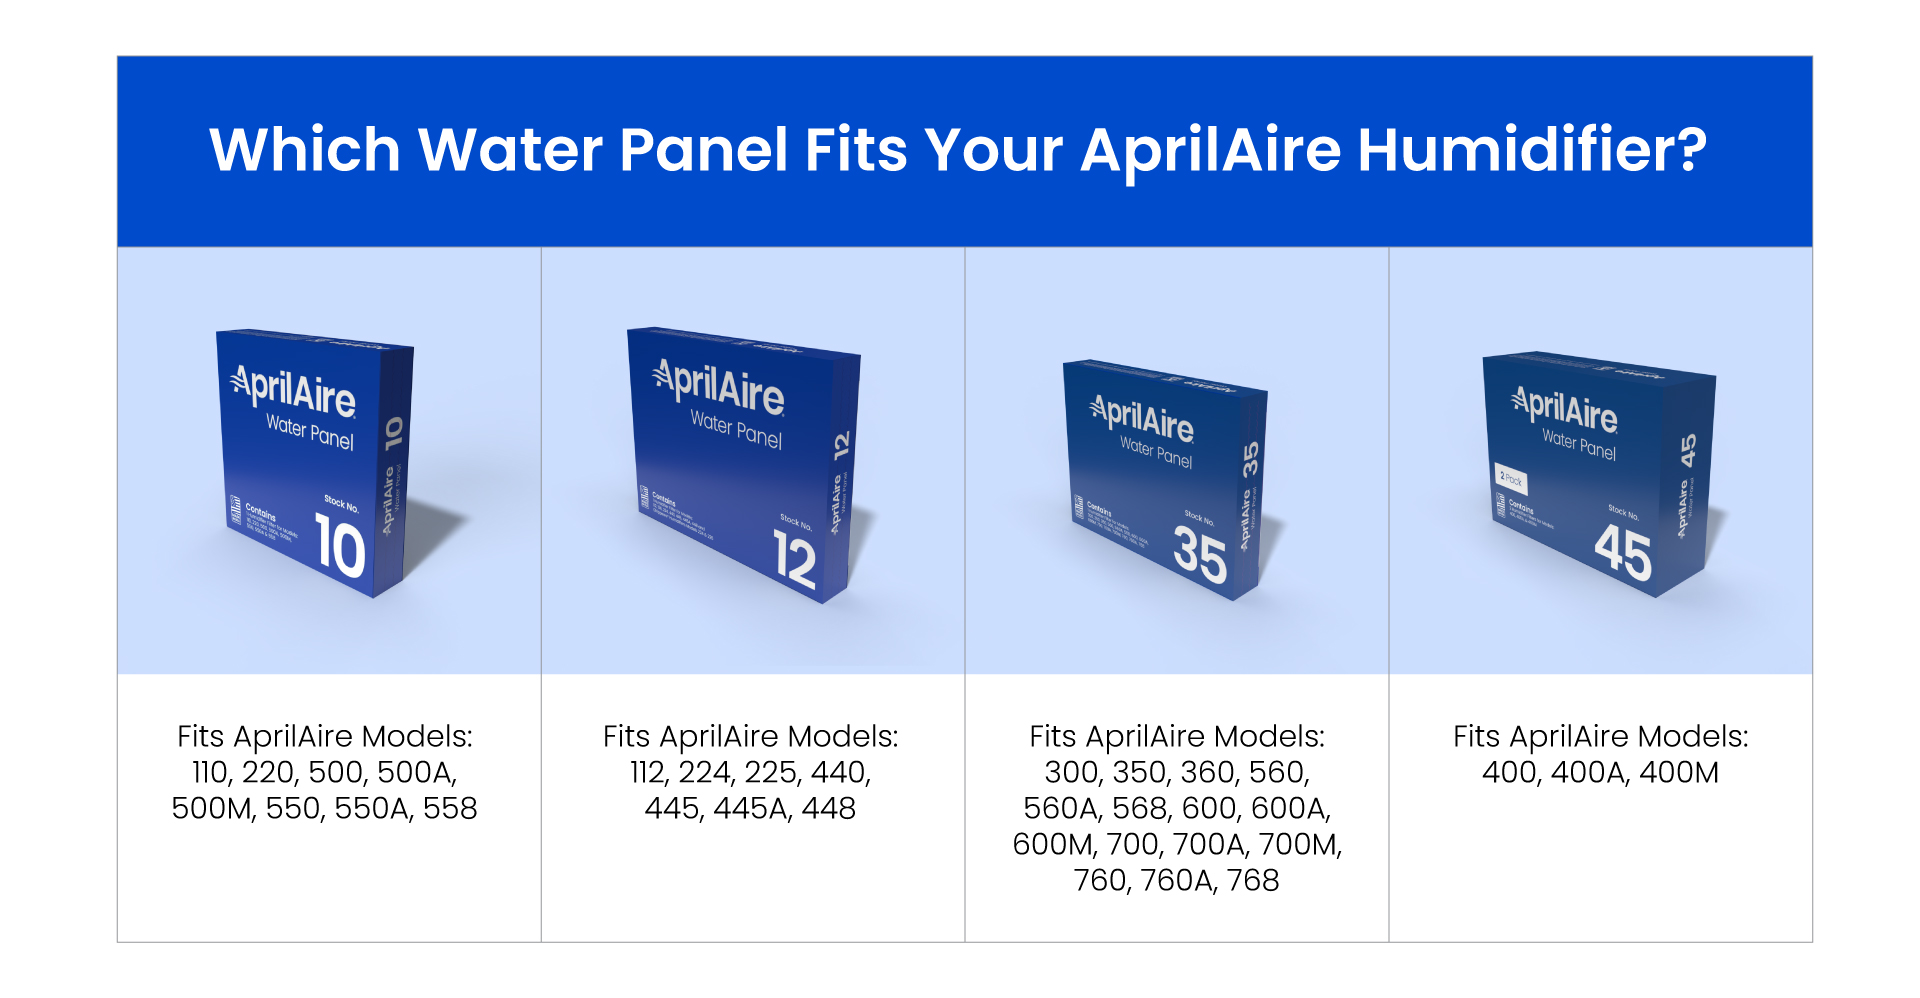 AprilAire Water Panels - Chart